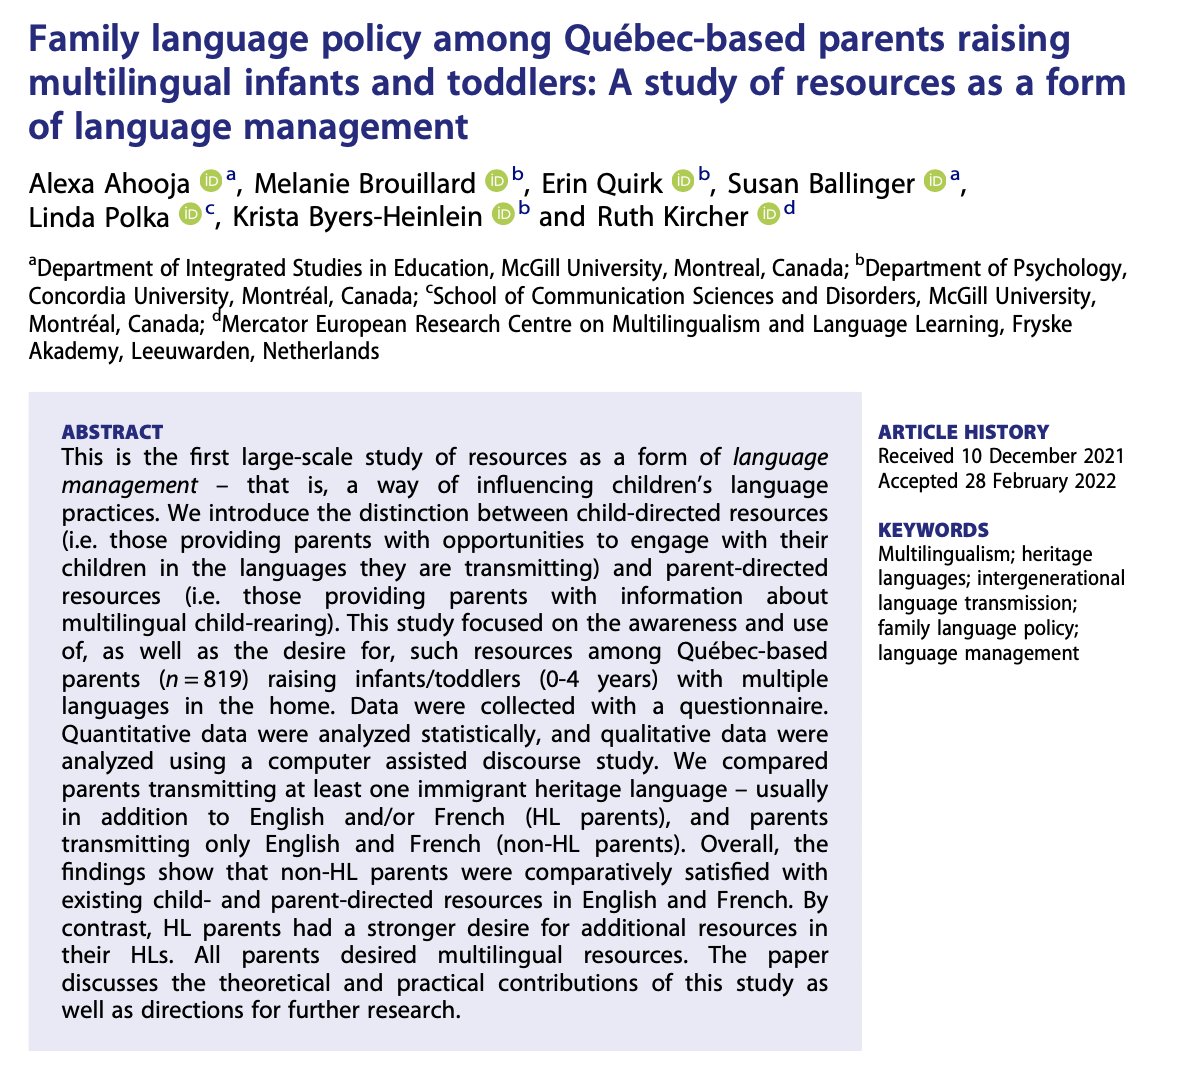 Delighted that the next paper in our series about #Quebec-based parents raising #multilingual kids is now out in JMMD—it examines #resources as a form of language management. Free e-prints here: tandfonline.com/eprint/QS7RBD4… #FamilyLanguagePolicy #HeritageLanguages #multilingualism